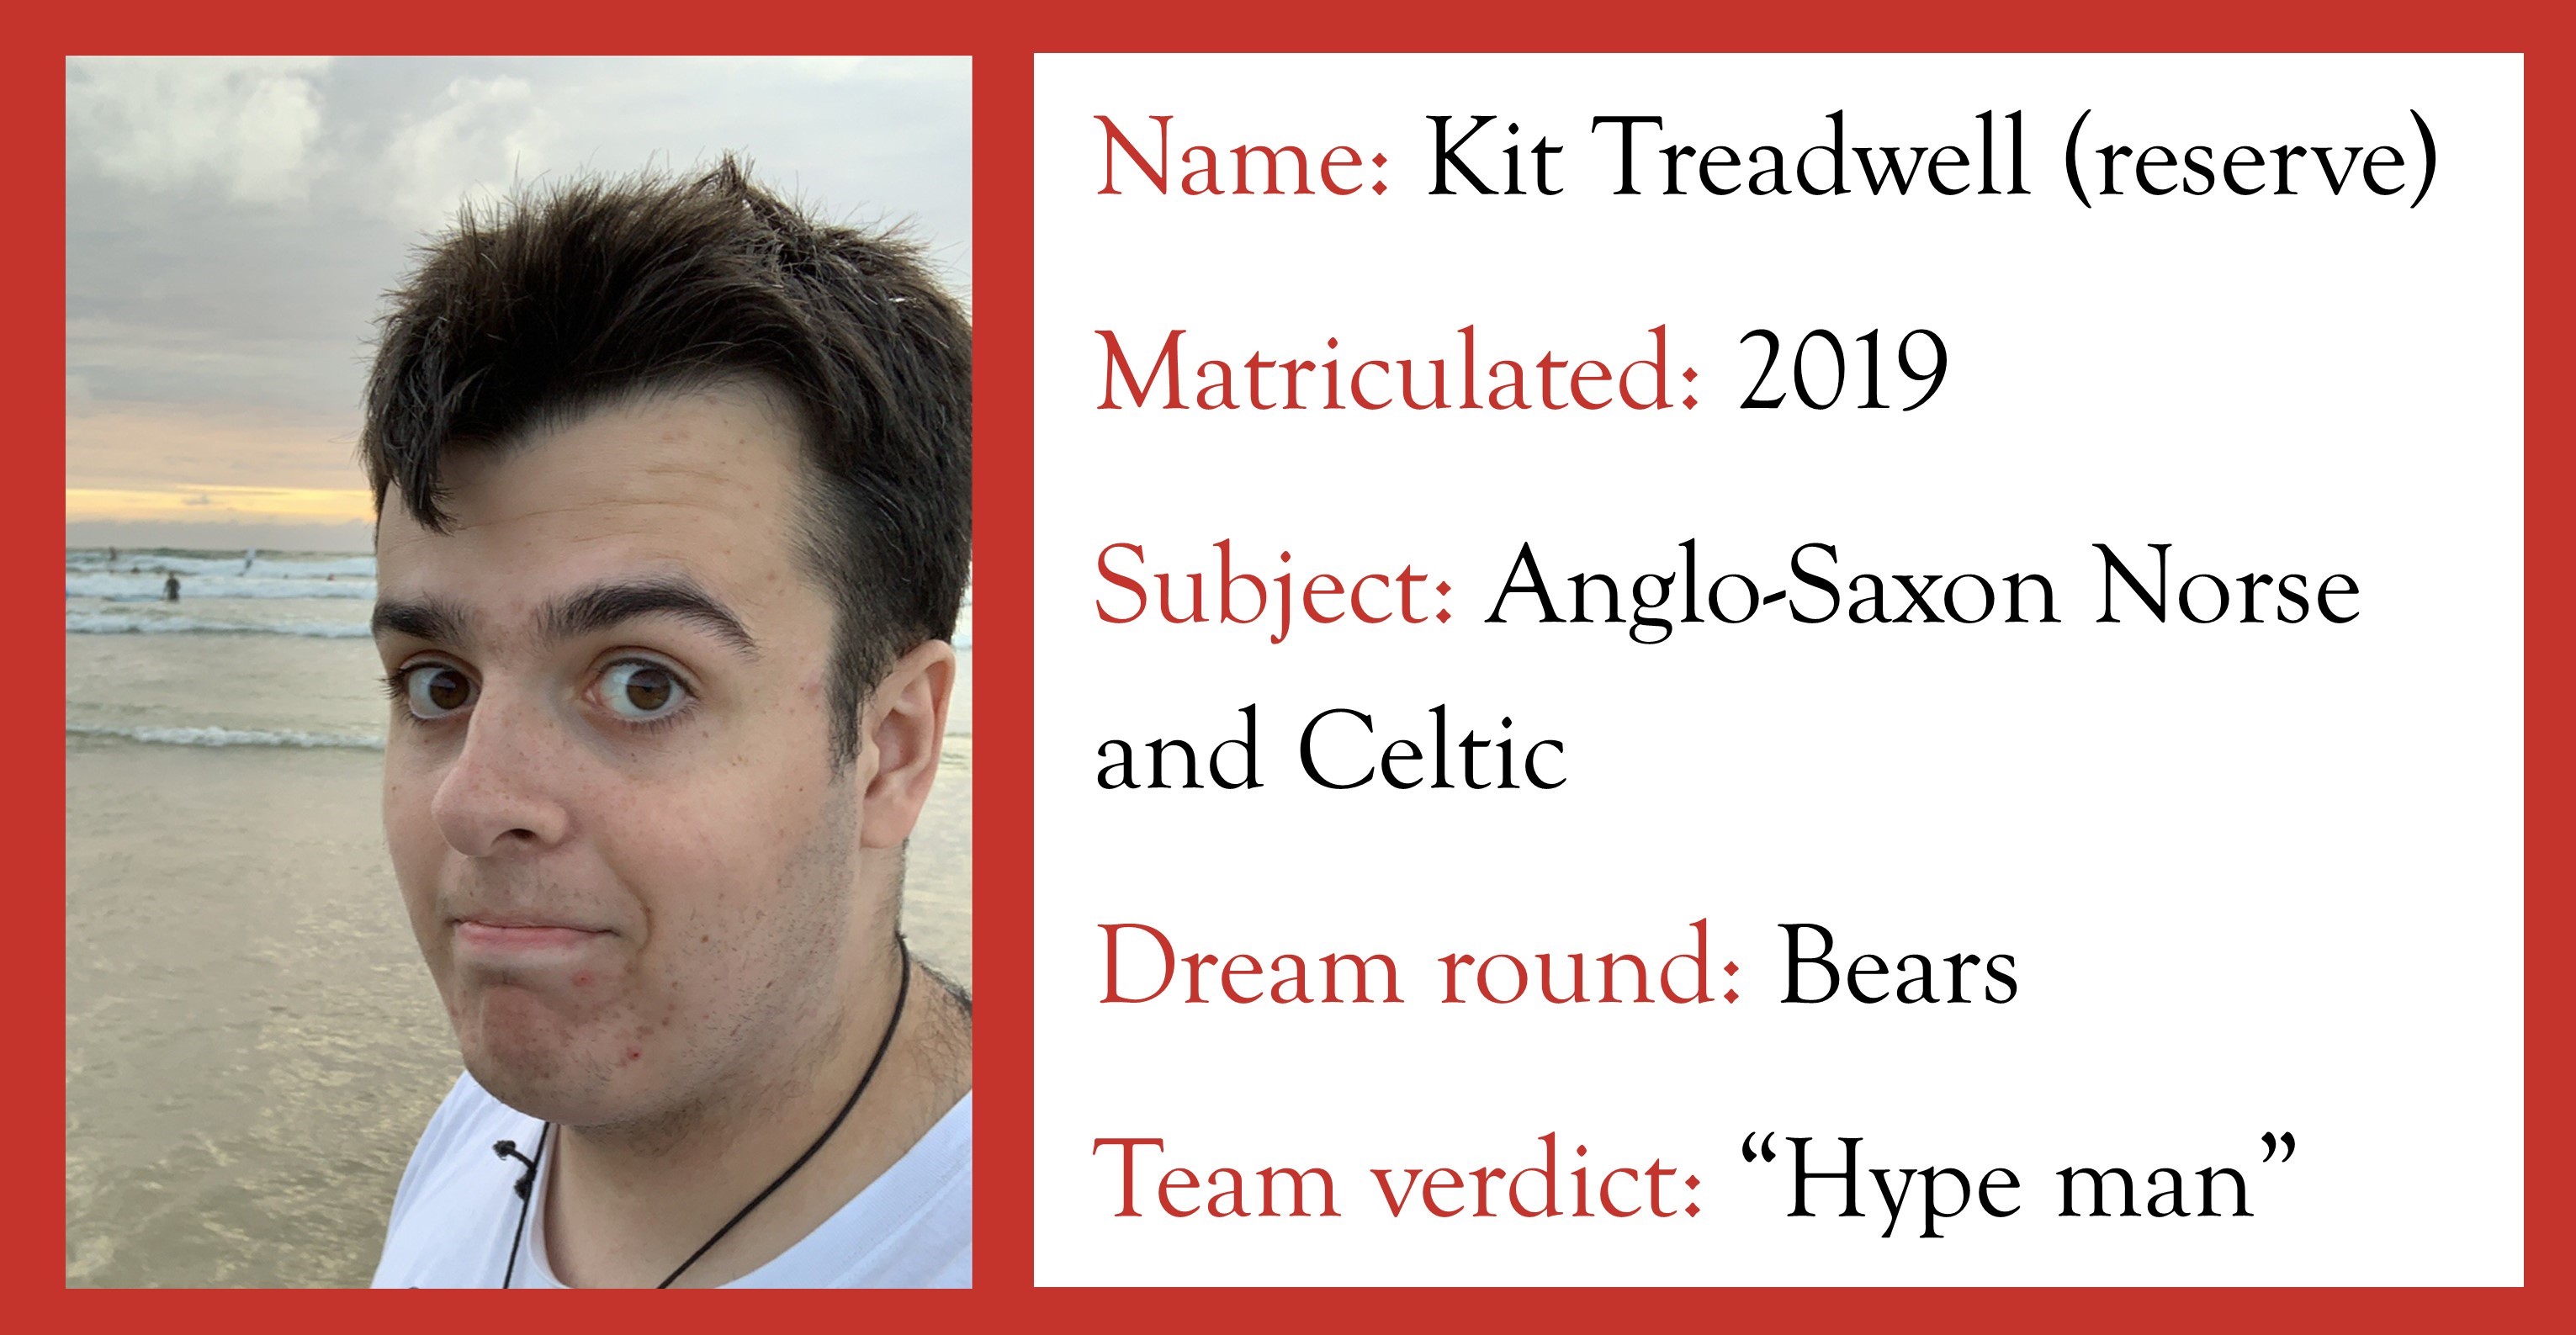 Profile for Kit Treadwell (reserve)